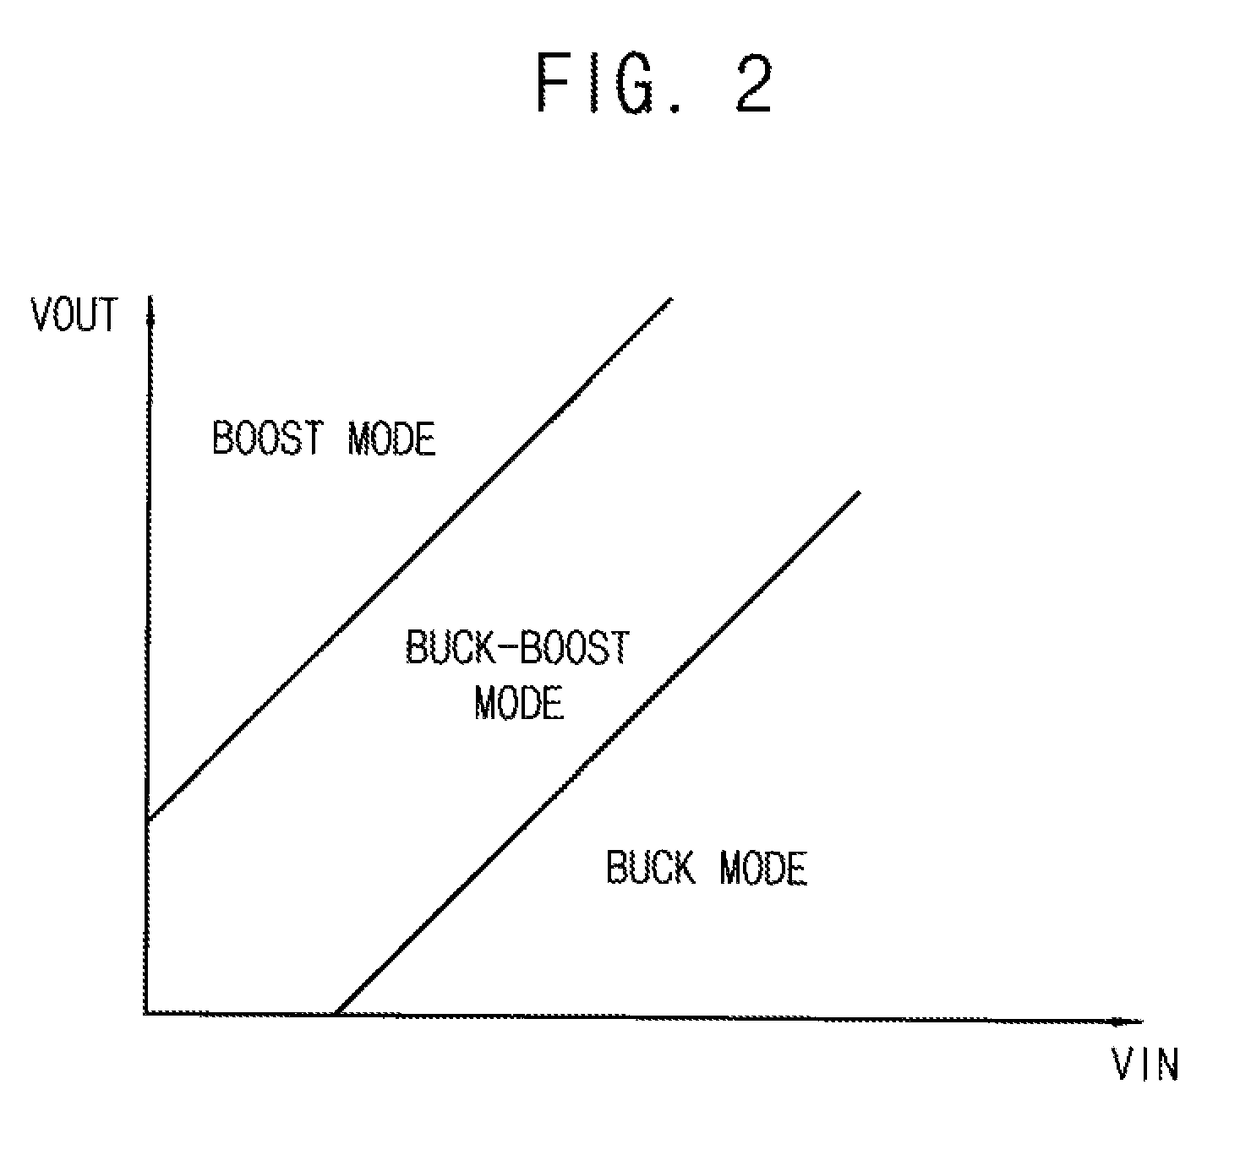 Buck-boost converters and power management integrated circuits including the same